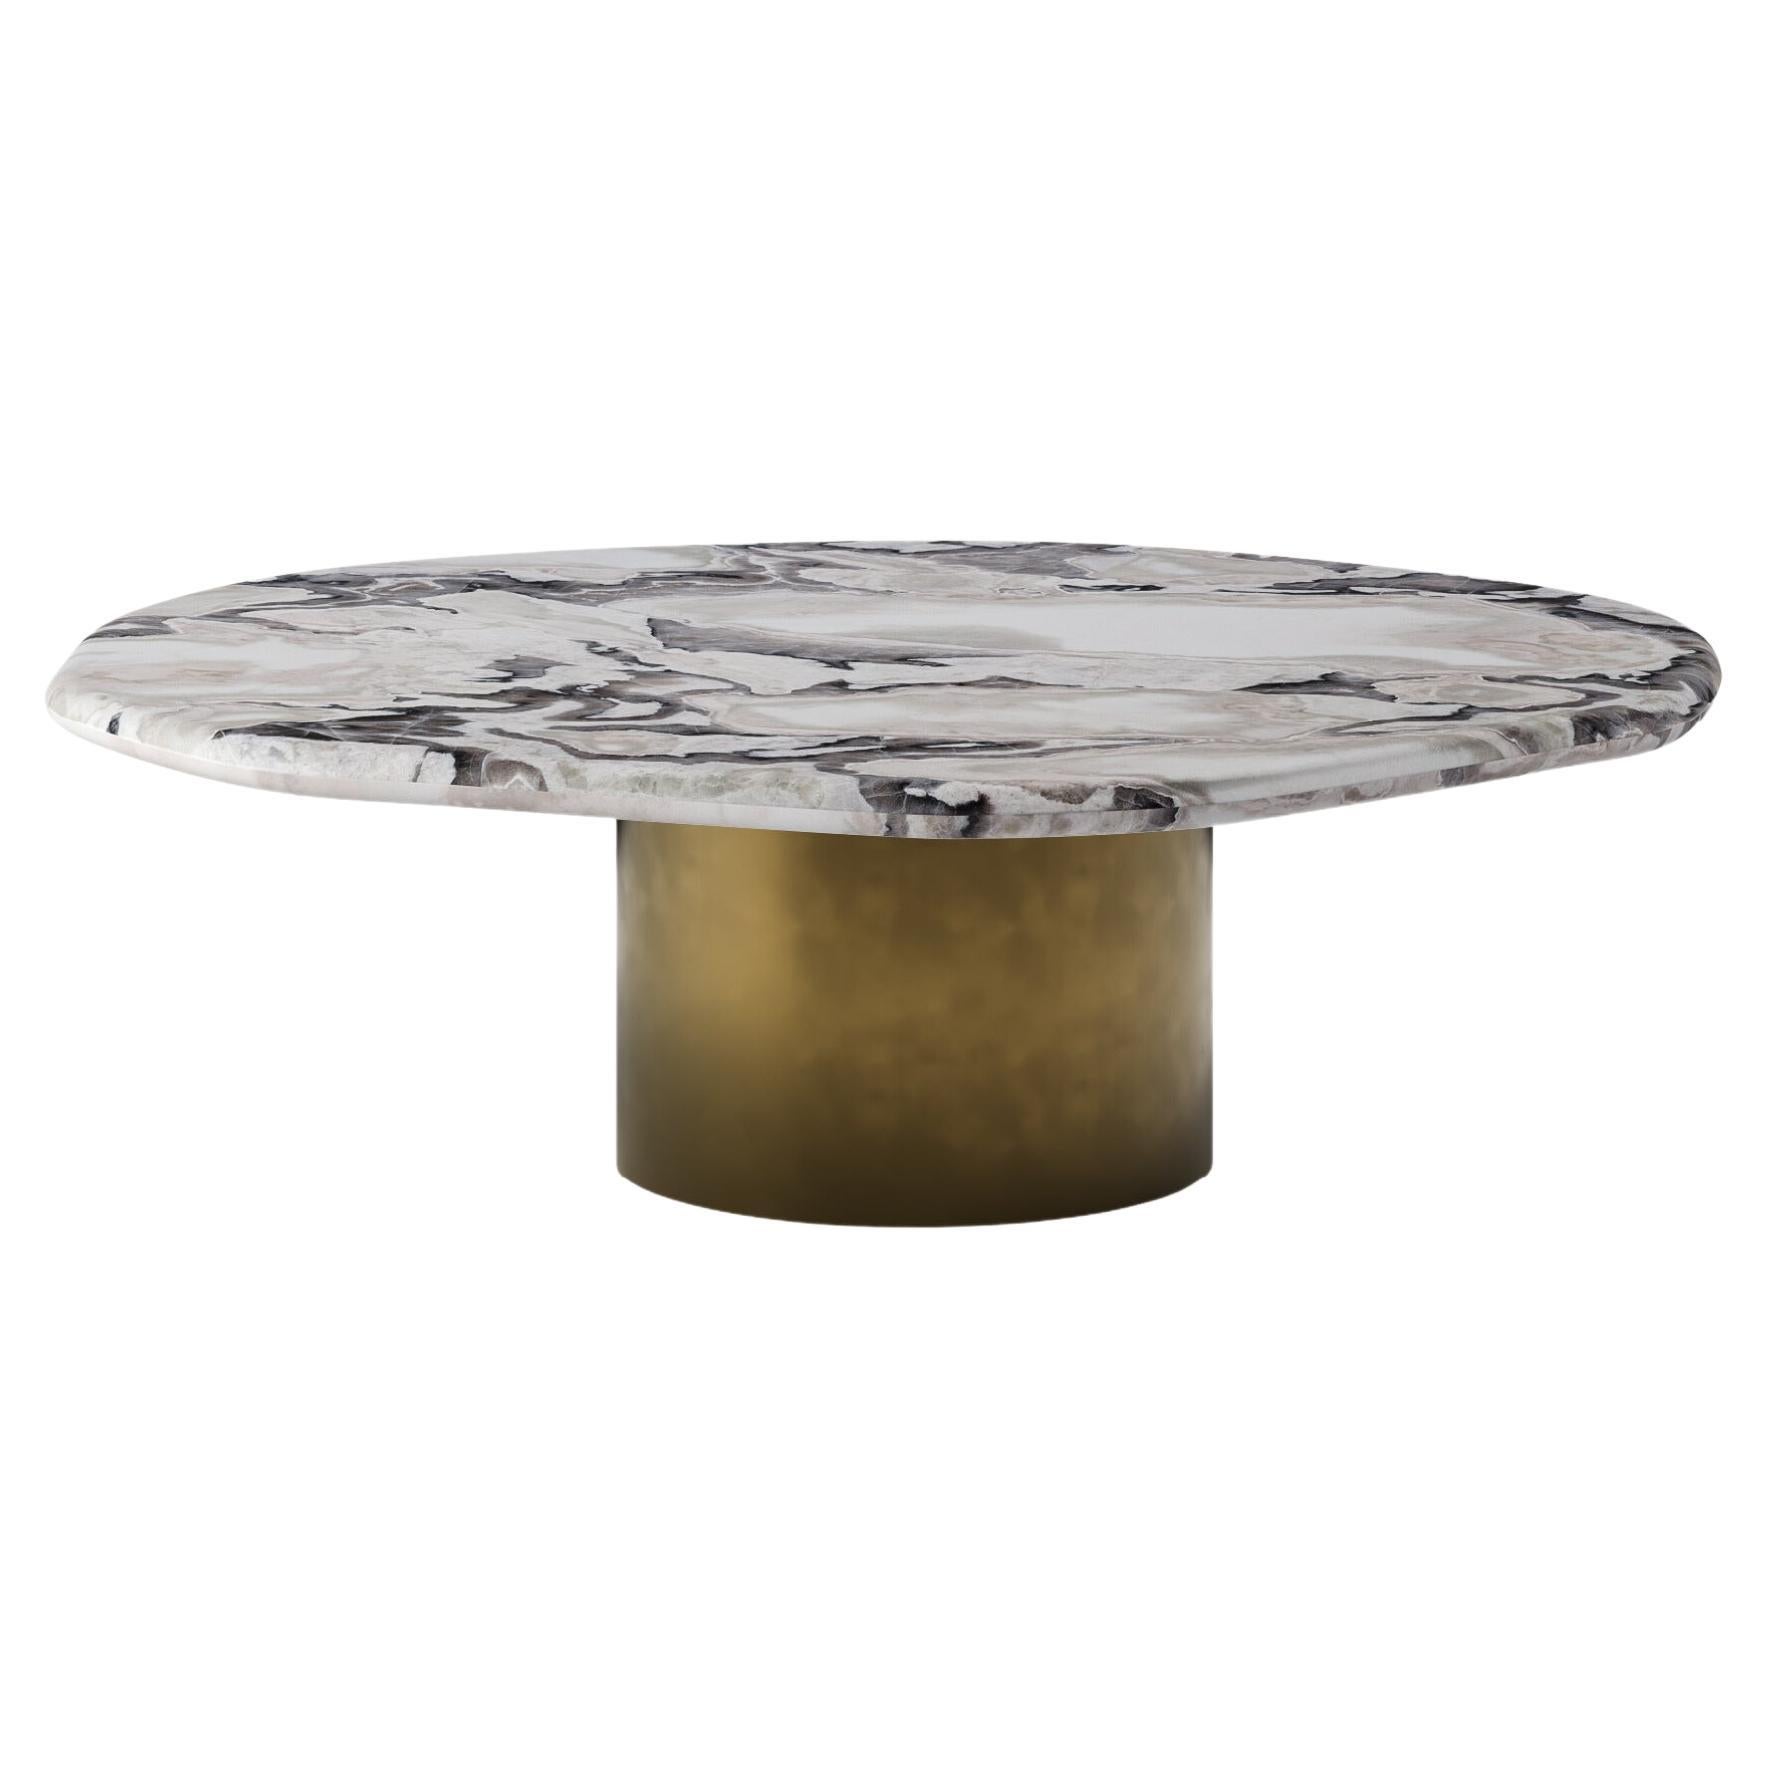 FORM(LA) Lago Round Coffee Table 42”L x 42”W x 14”H Oyster White Marble & Bronze For Sale